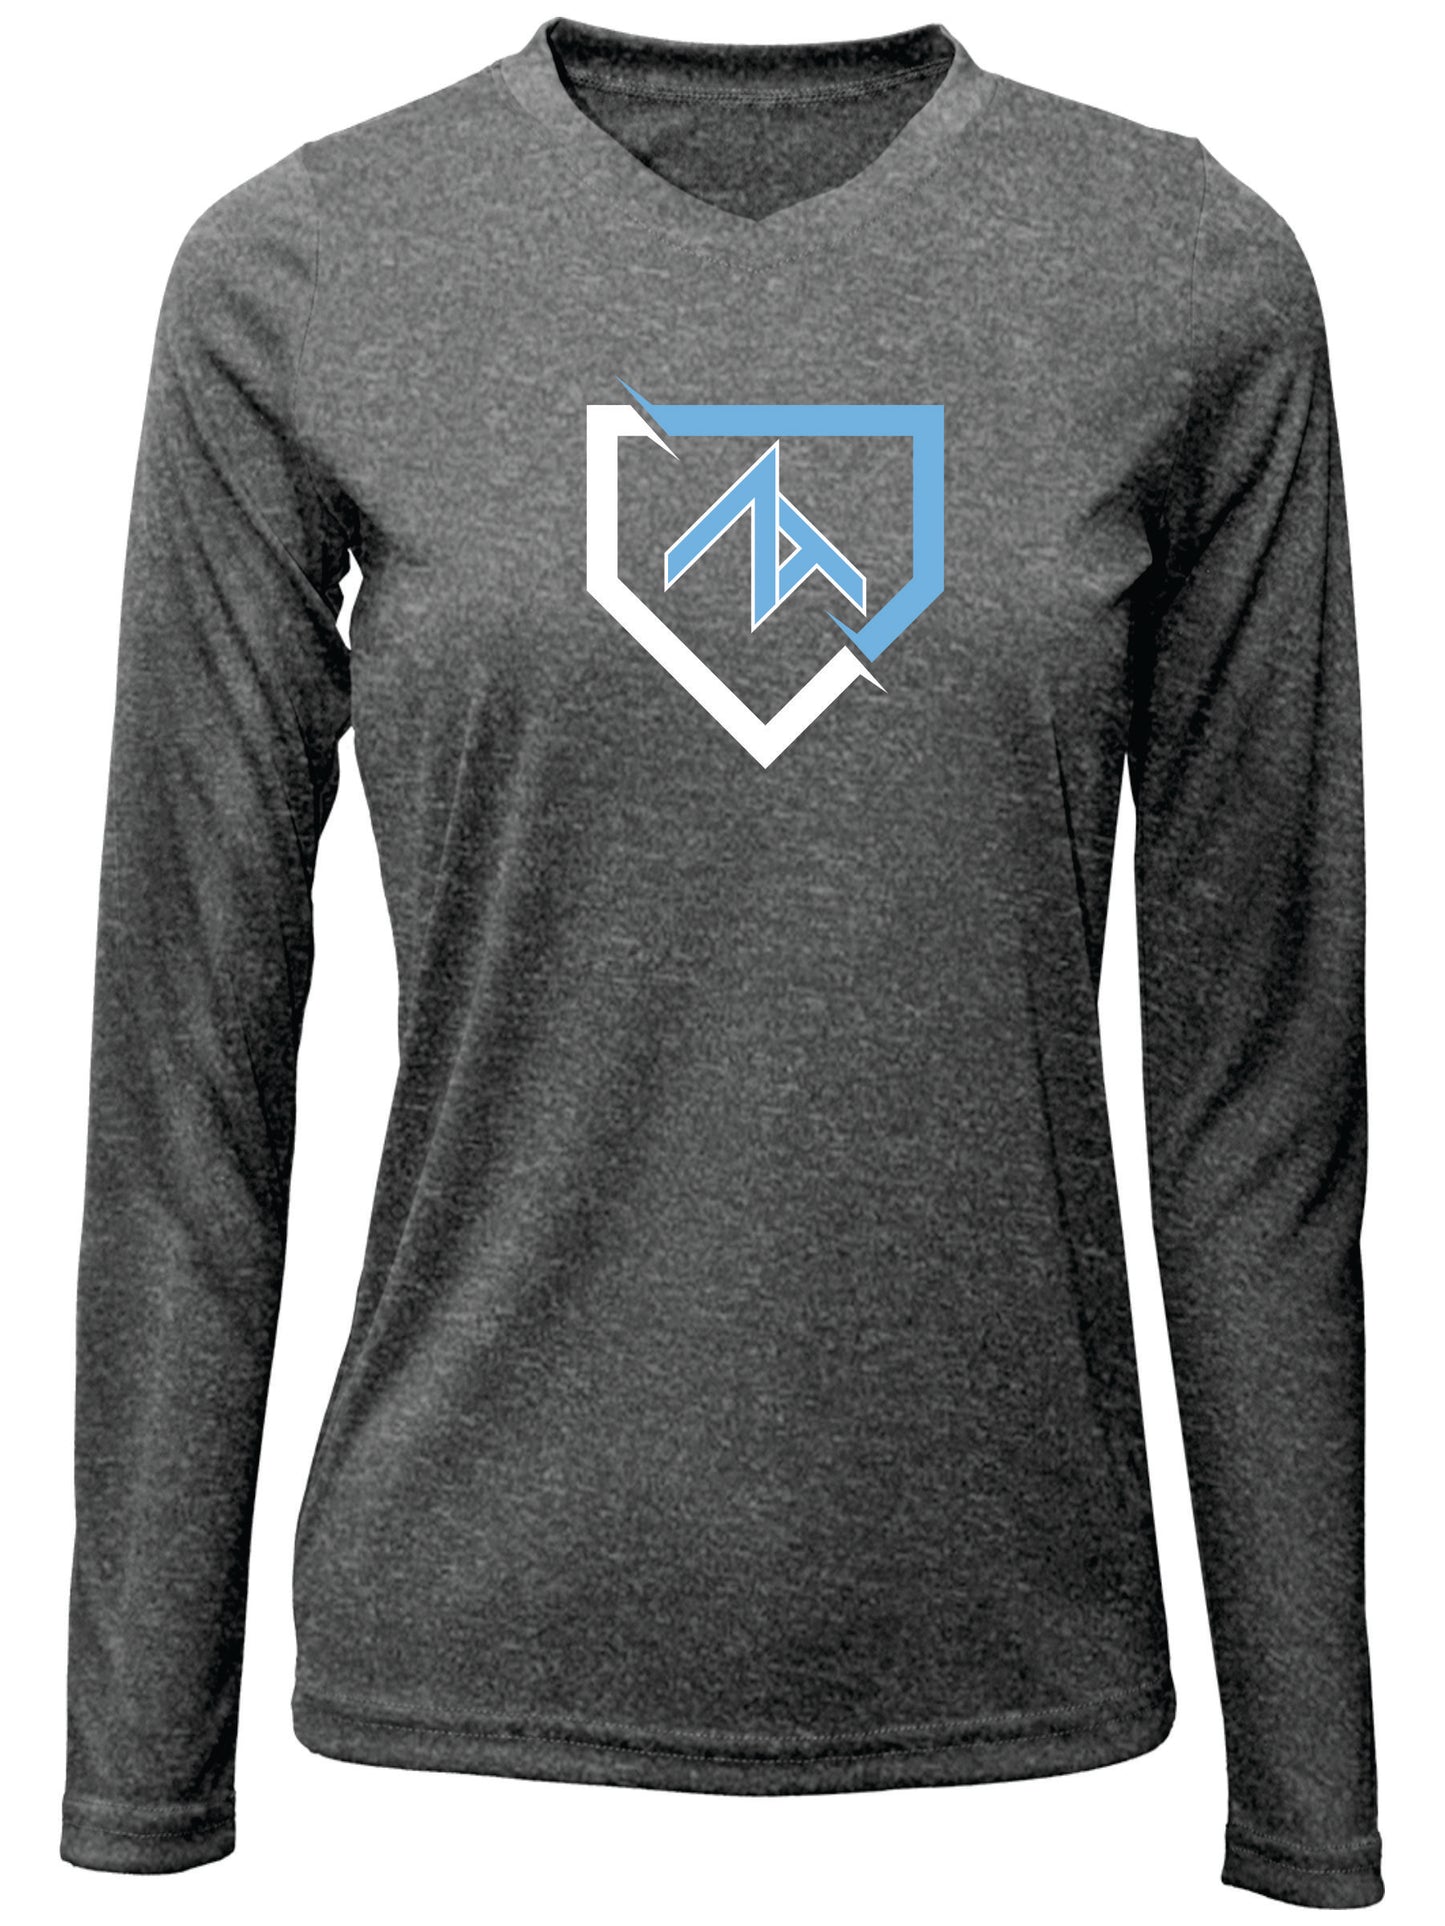 Ladies Long Sleeve "FRACTURED PLATE" Cotton T-shirt